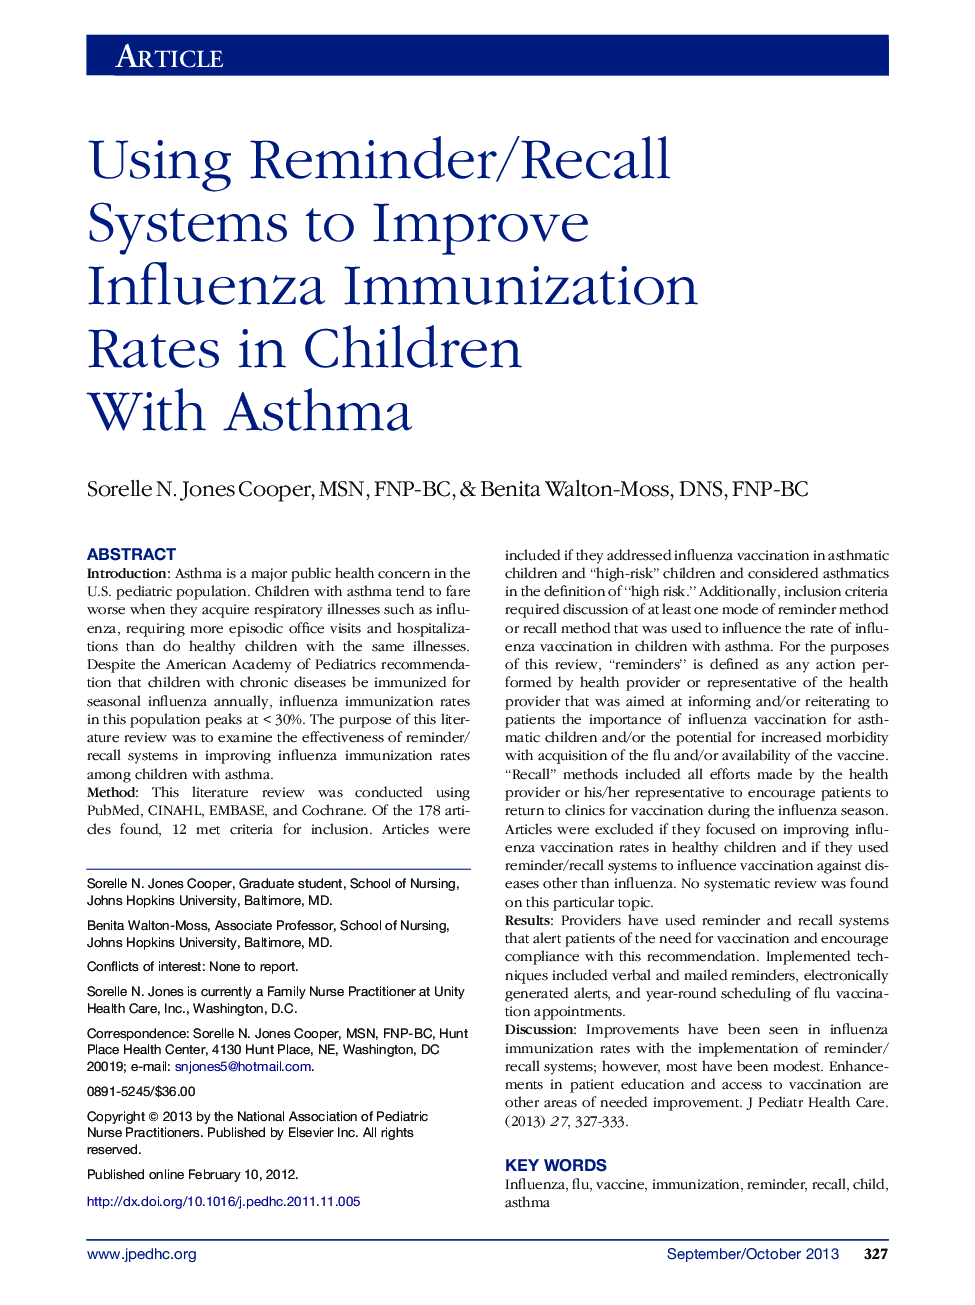 Using Reminder/Recall Systems to Improve Influenza Immunization Rates in Children With Asthma 